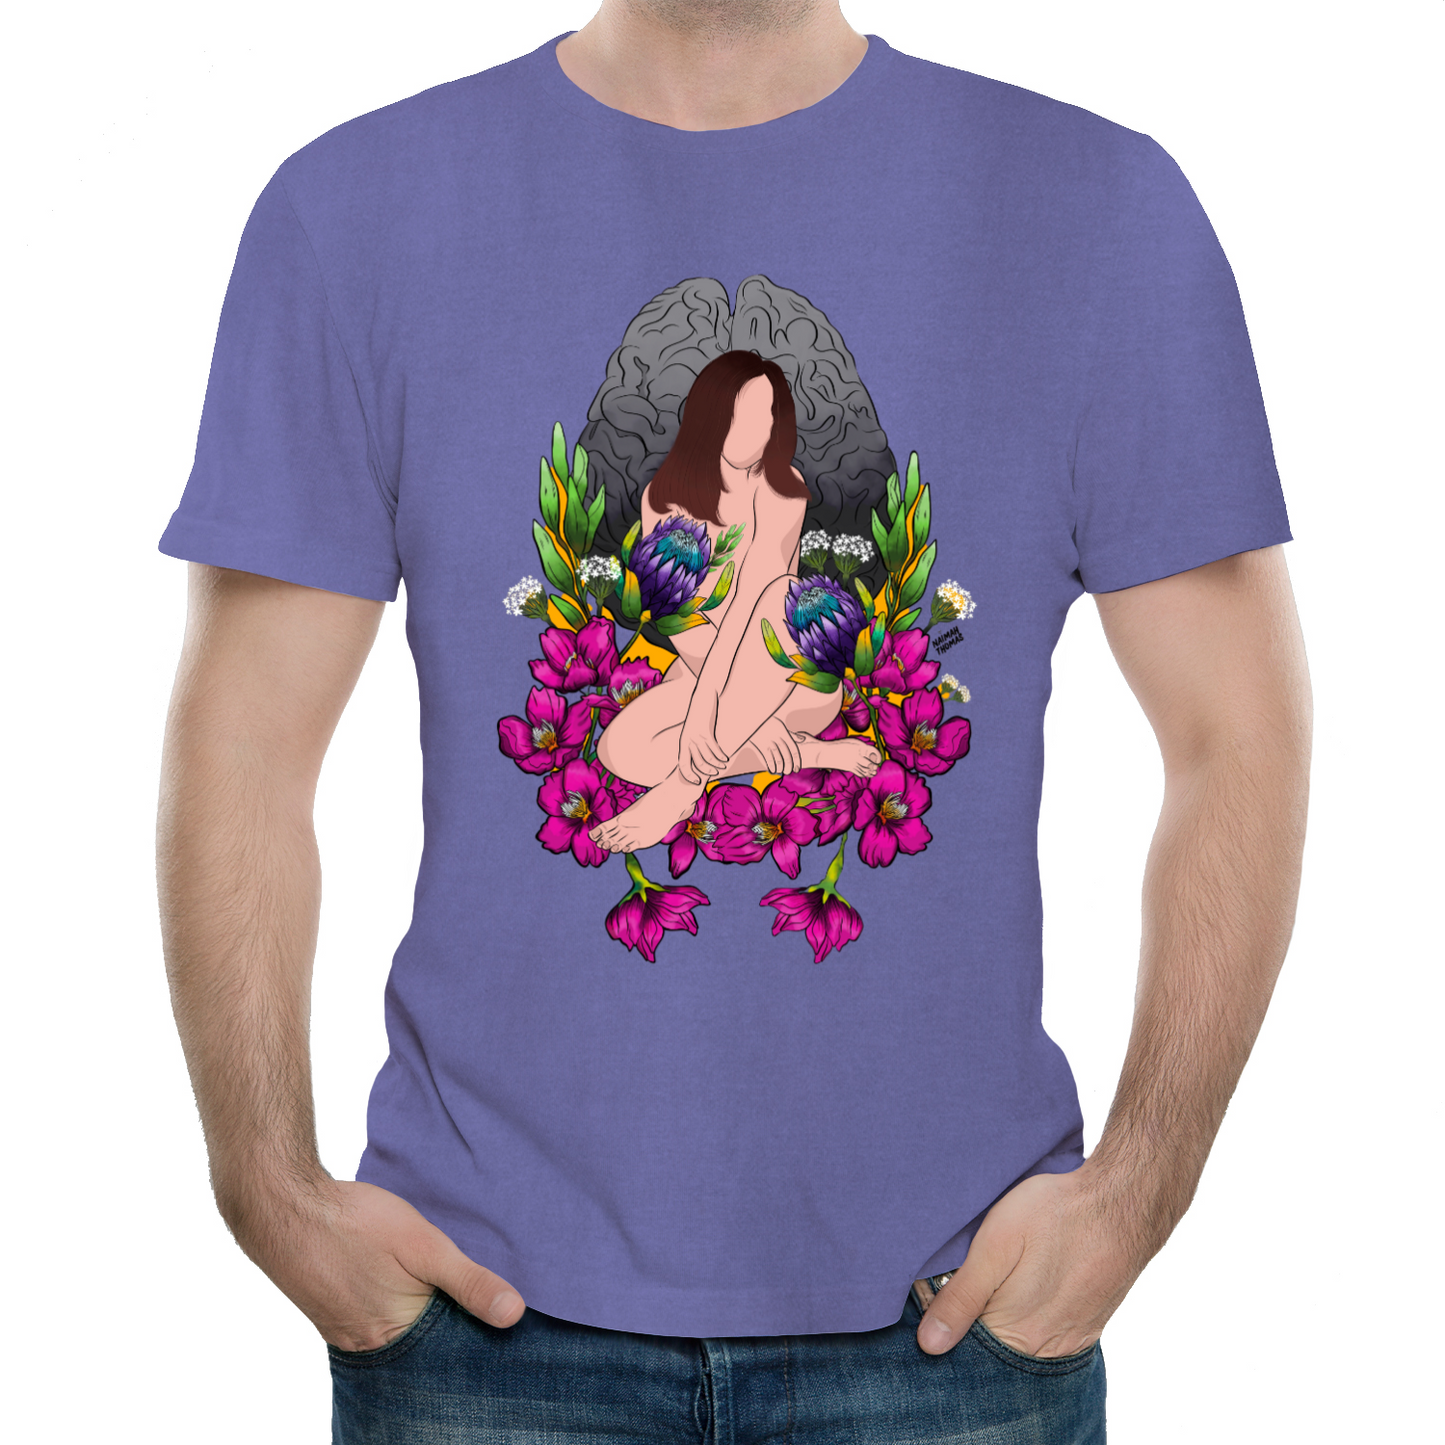 "Wandering amongst the cherry blossoms" Unisex Tee